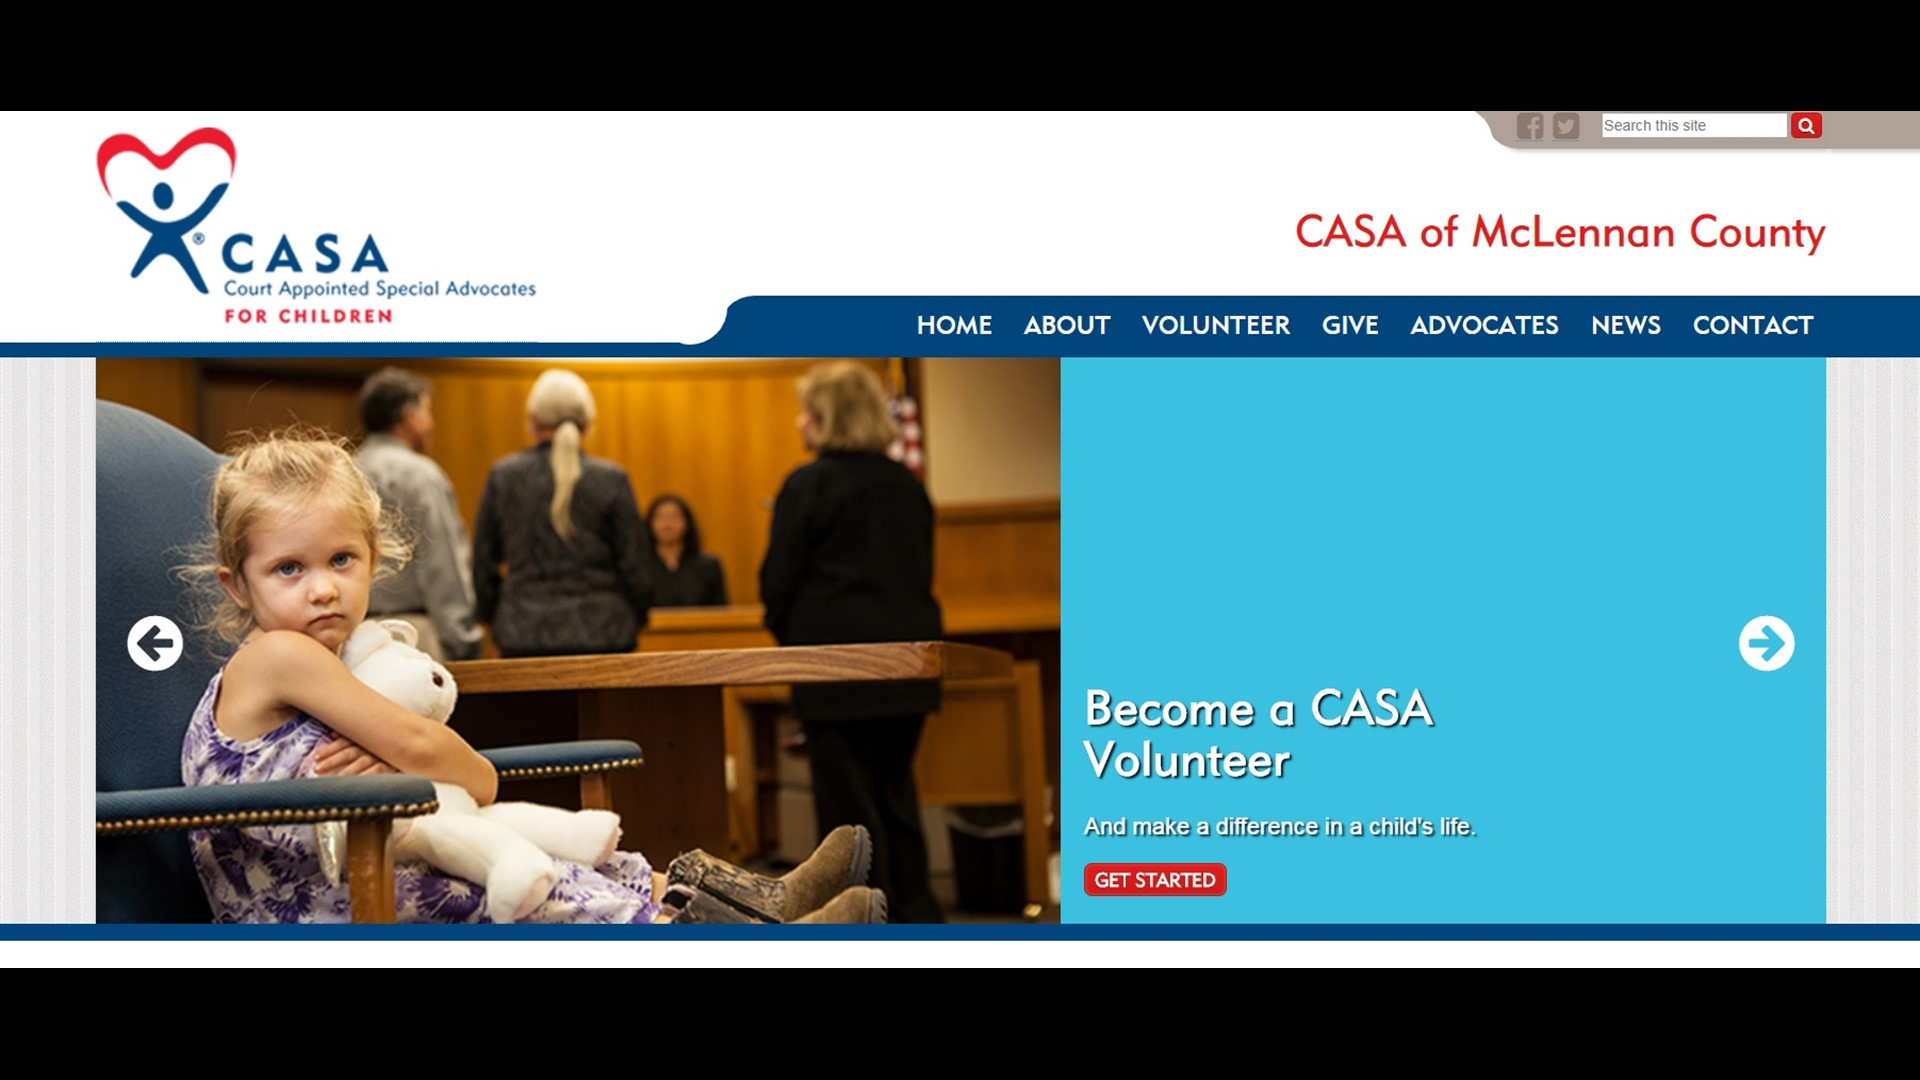 McLennan County CASA, a non-profit organization that provides trained volunteers for children who go into CPS custody, listed their top priorities for the 86th Texas Legislative Session. CASA website: https://texascasa.org/86th-legislative-session/